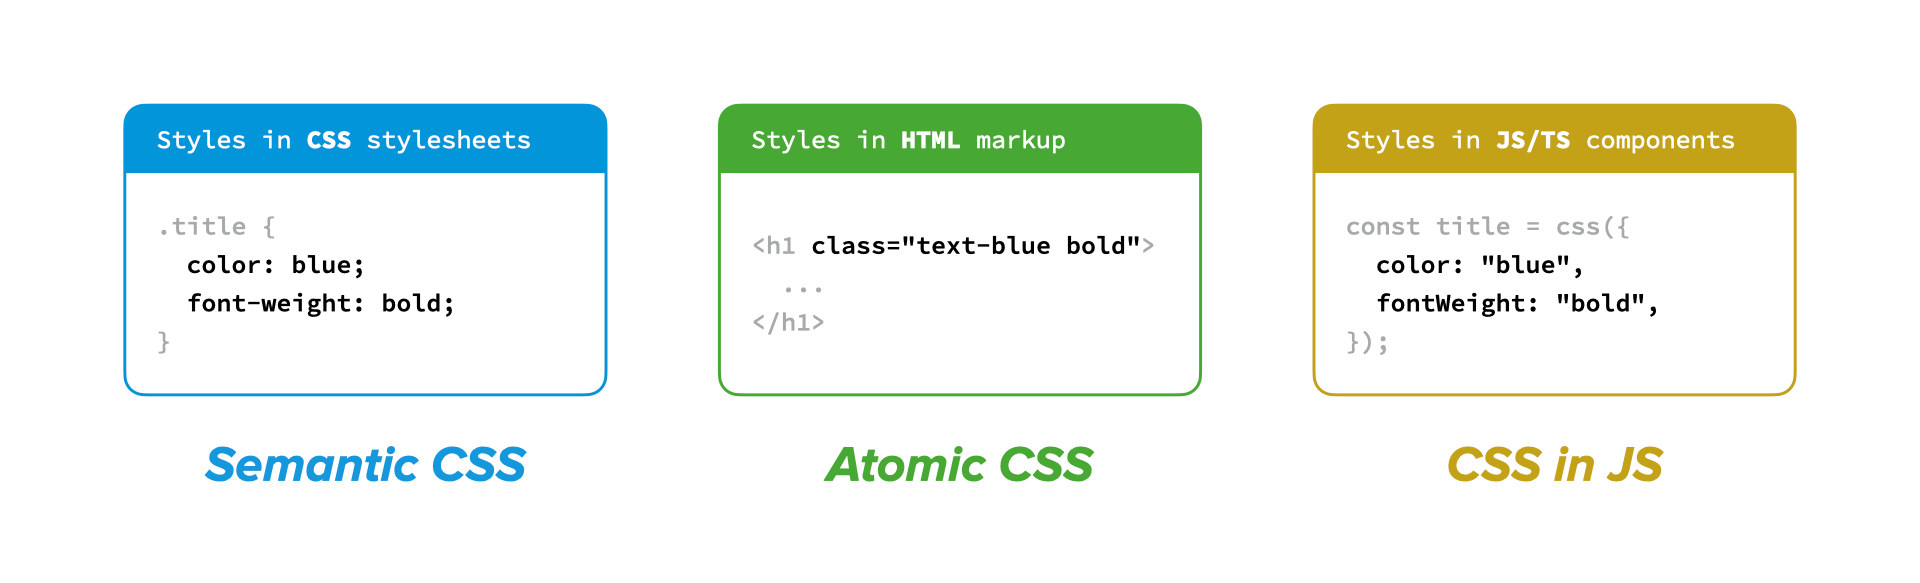 Styles for text color blue and font weight bold defined in 3 different paradigms: first, Semantic CSS which uses CSS stylesheets for styles definitions; second, Atomic CSS where styles are specified in the HTML markup by applying existing CSS classes; and third, CSS in JS where styles are defined in JavaScript files